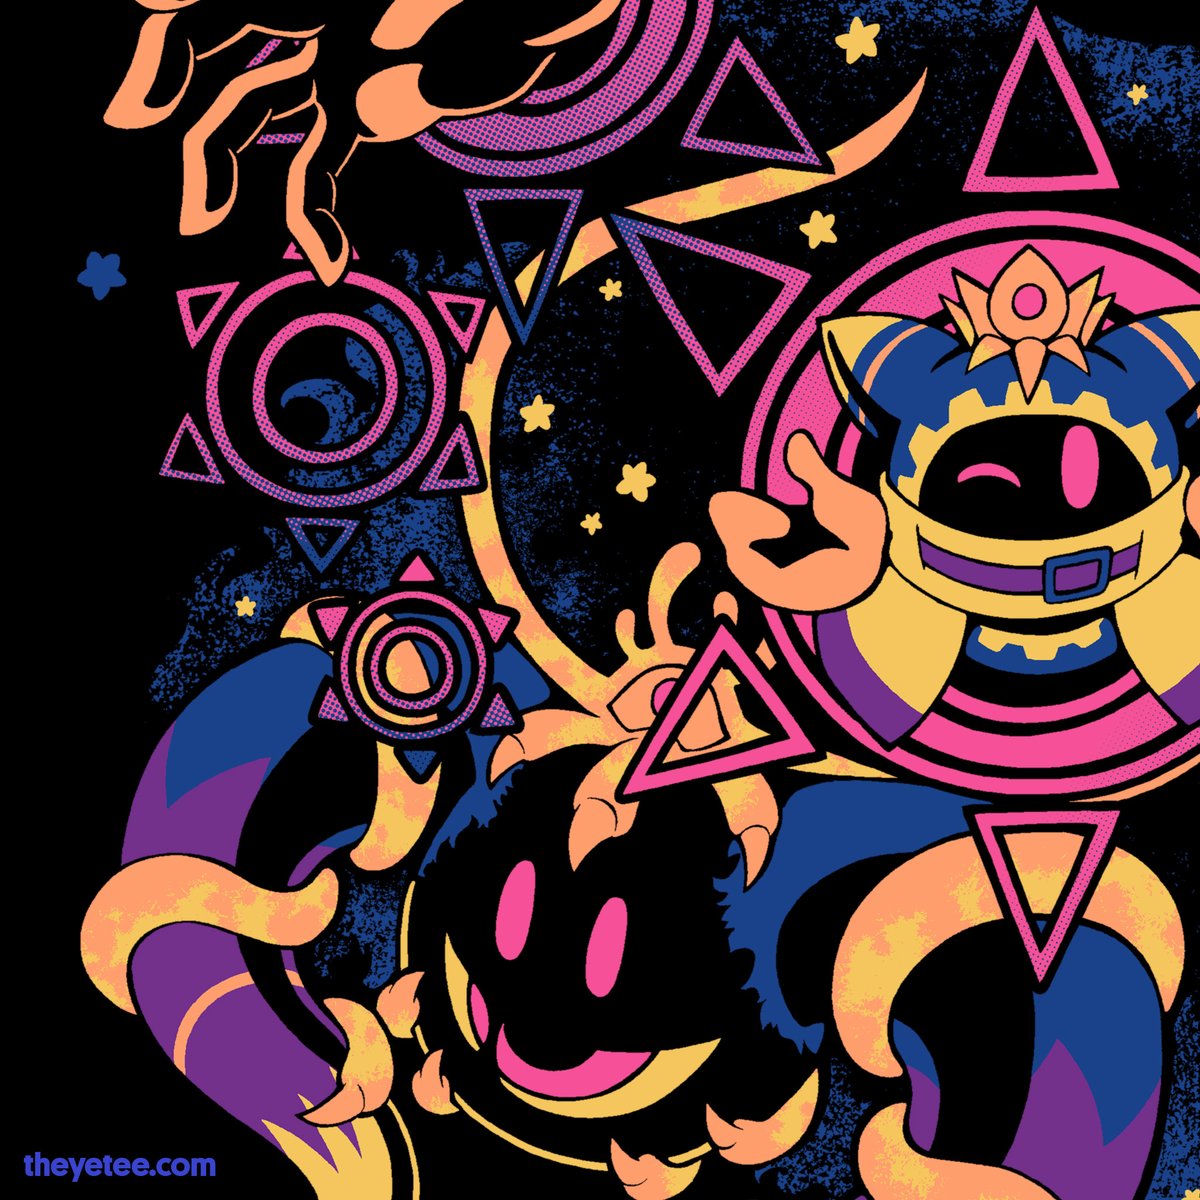 「Road to redemption… #sneakpeek #dailytee」|The Yetee 🌈のイラスト